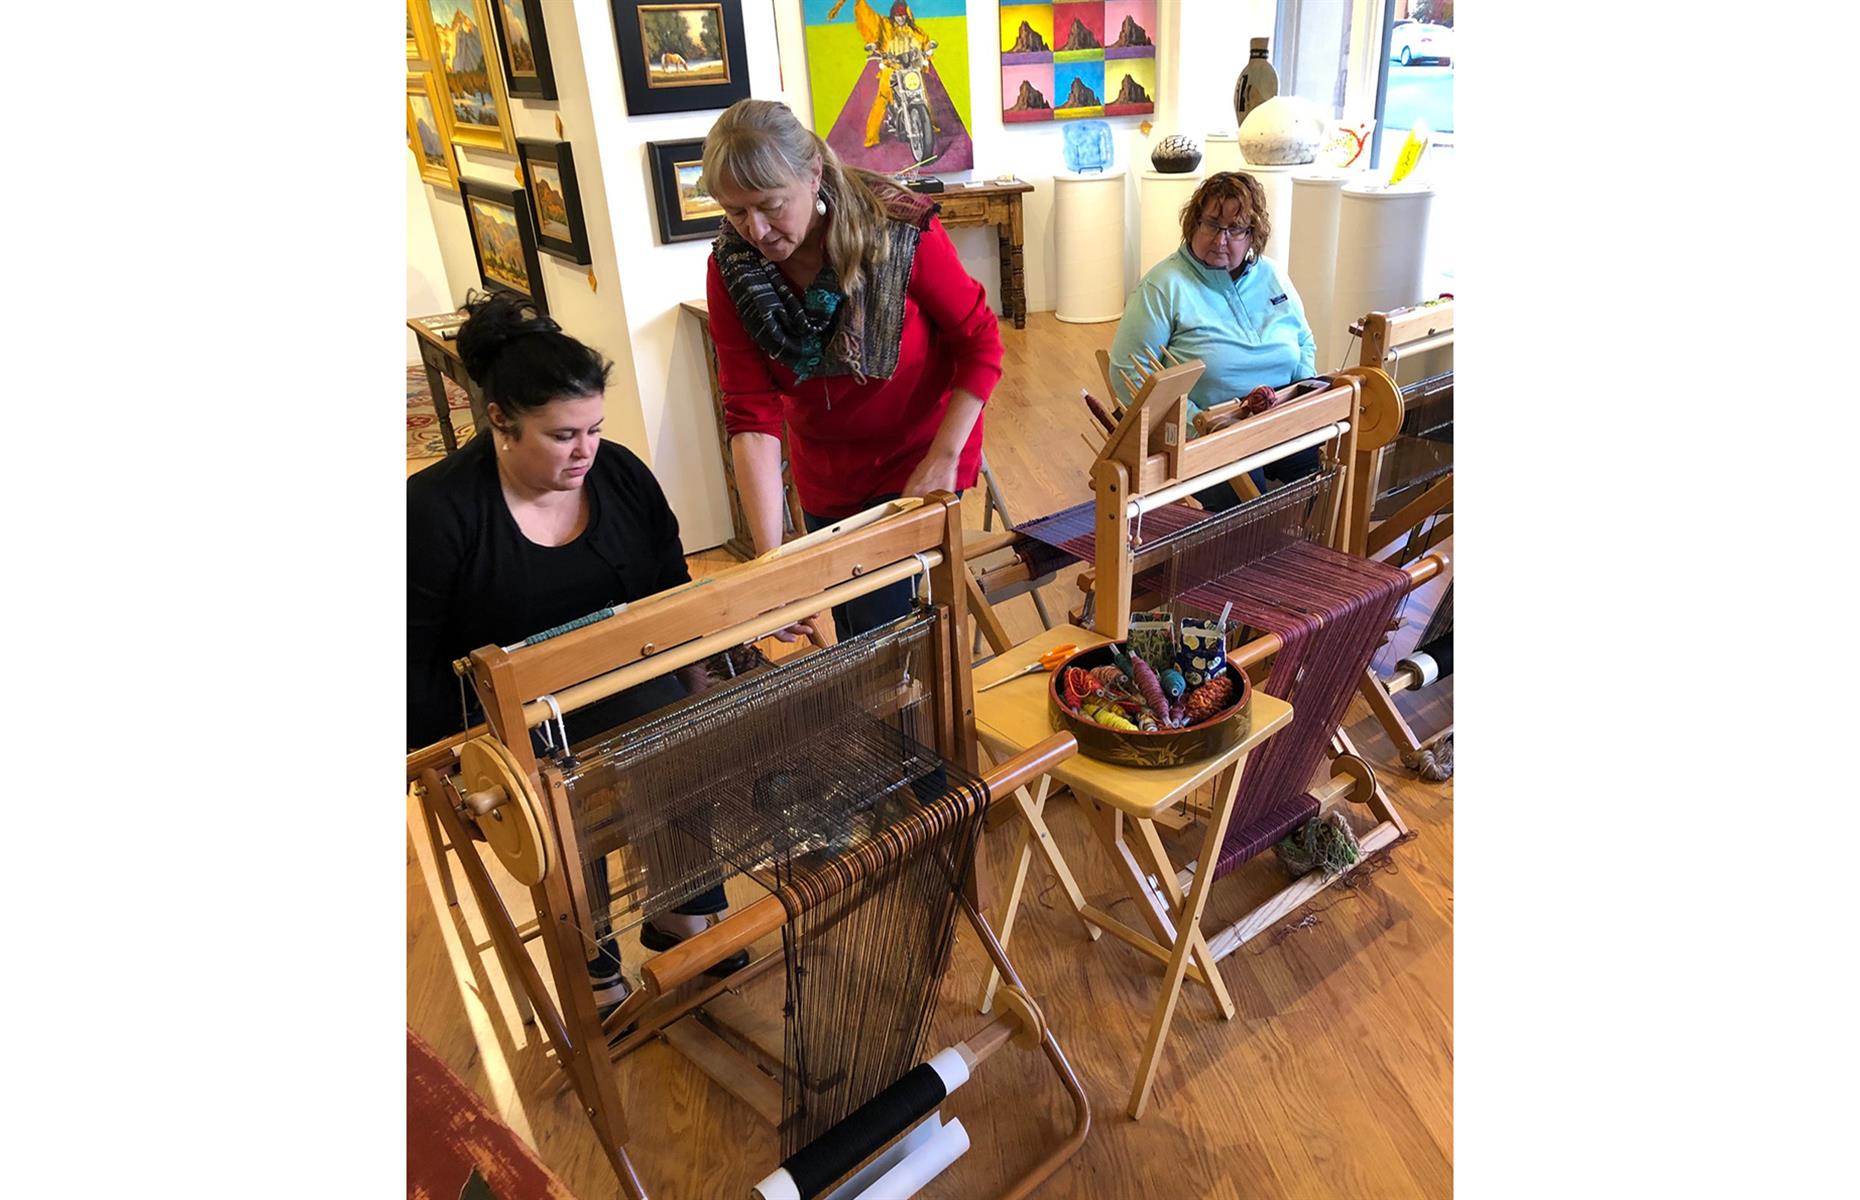 <p>If you've always been keen to create your own handcrafted item, this freestyle weaving class in Santa Fe is for you. First, choose a pattern and color combination, then learn the basics of weaving as the host Dayna guides you. You'll get to keep the piece you've created too. Prices <a href="https://www.airbnb.com/experiences/244392?irgwc=1&irclid=0wm12rU21zryRz-X29x6O1wtUkBX5O2CwzlPU00&ircid=5503&sharedid=lovemoney.com&iratid=12347&c=.pi73.pk5503_10078&af=10078&iradid=378143">start from around $150</a> per person.</p>